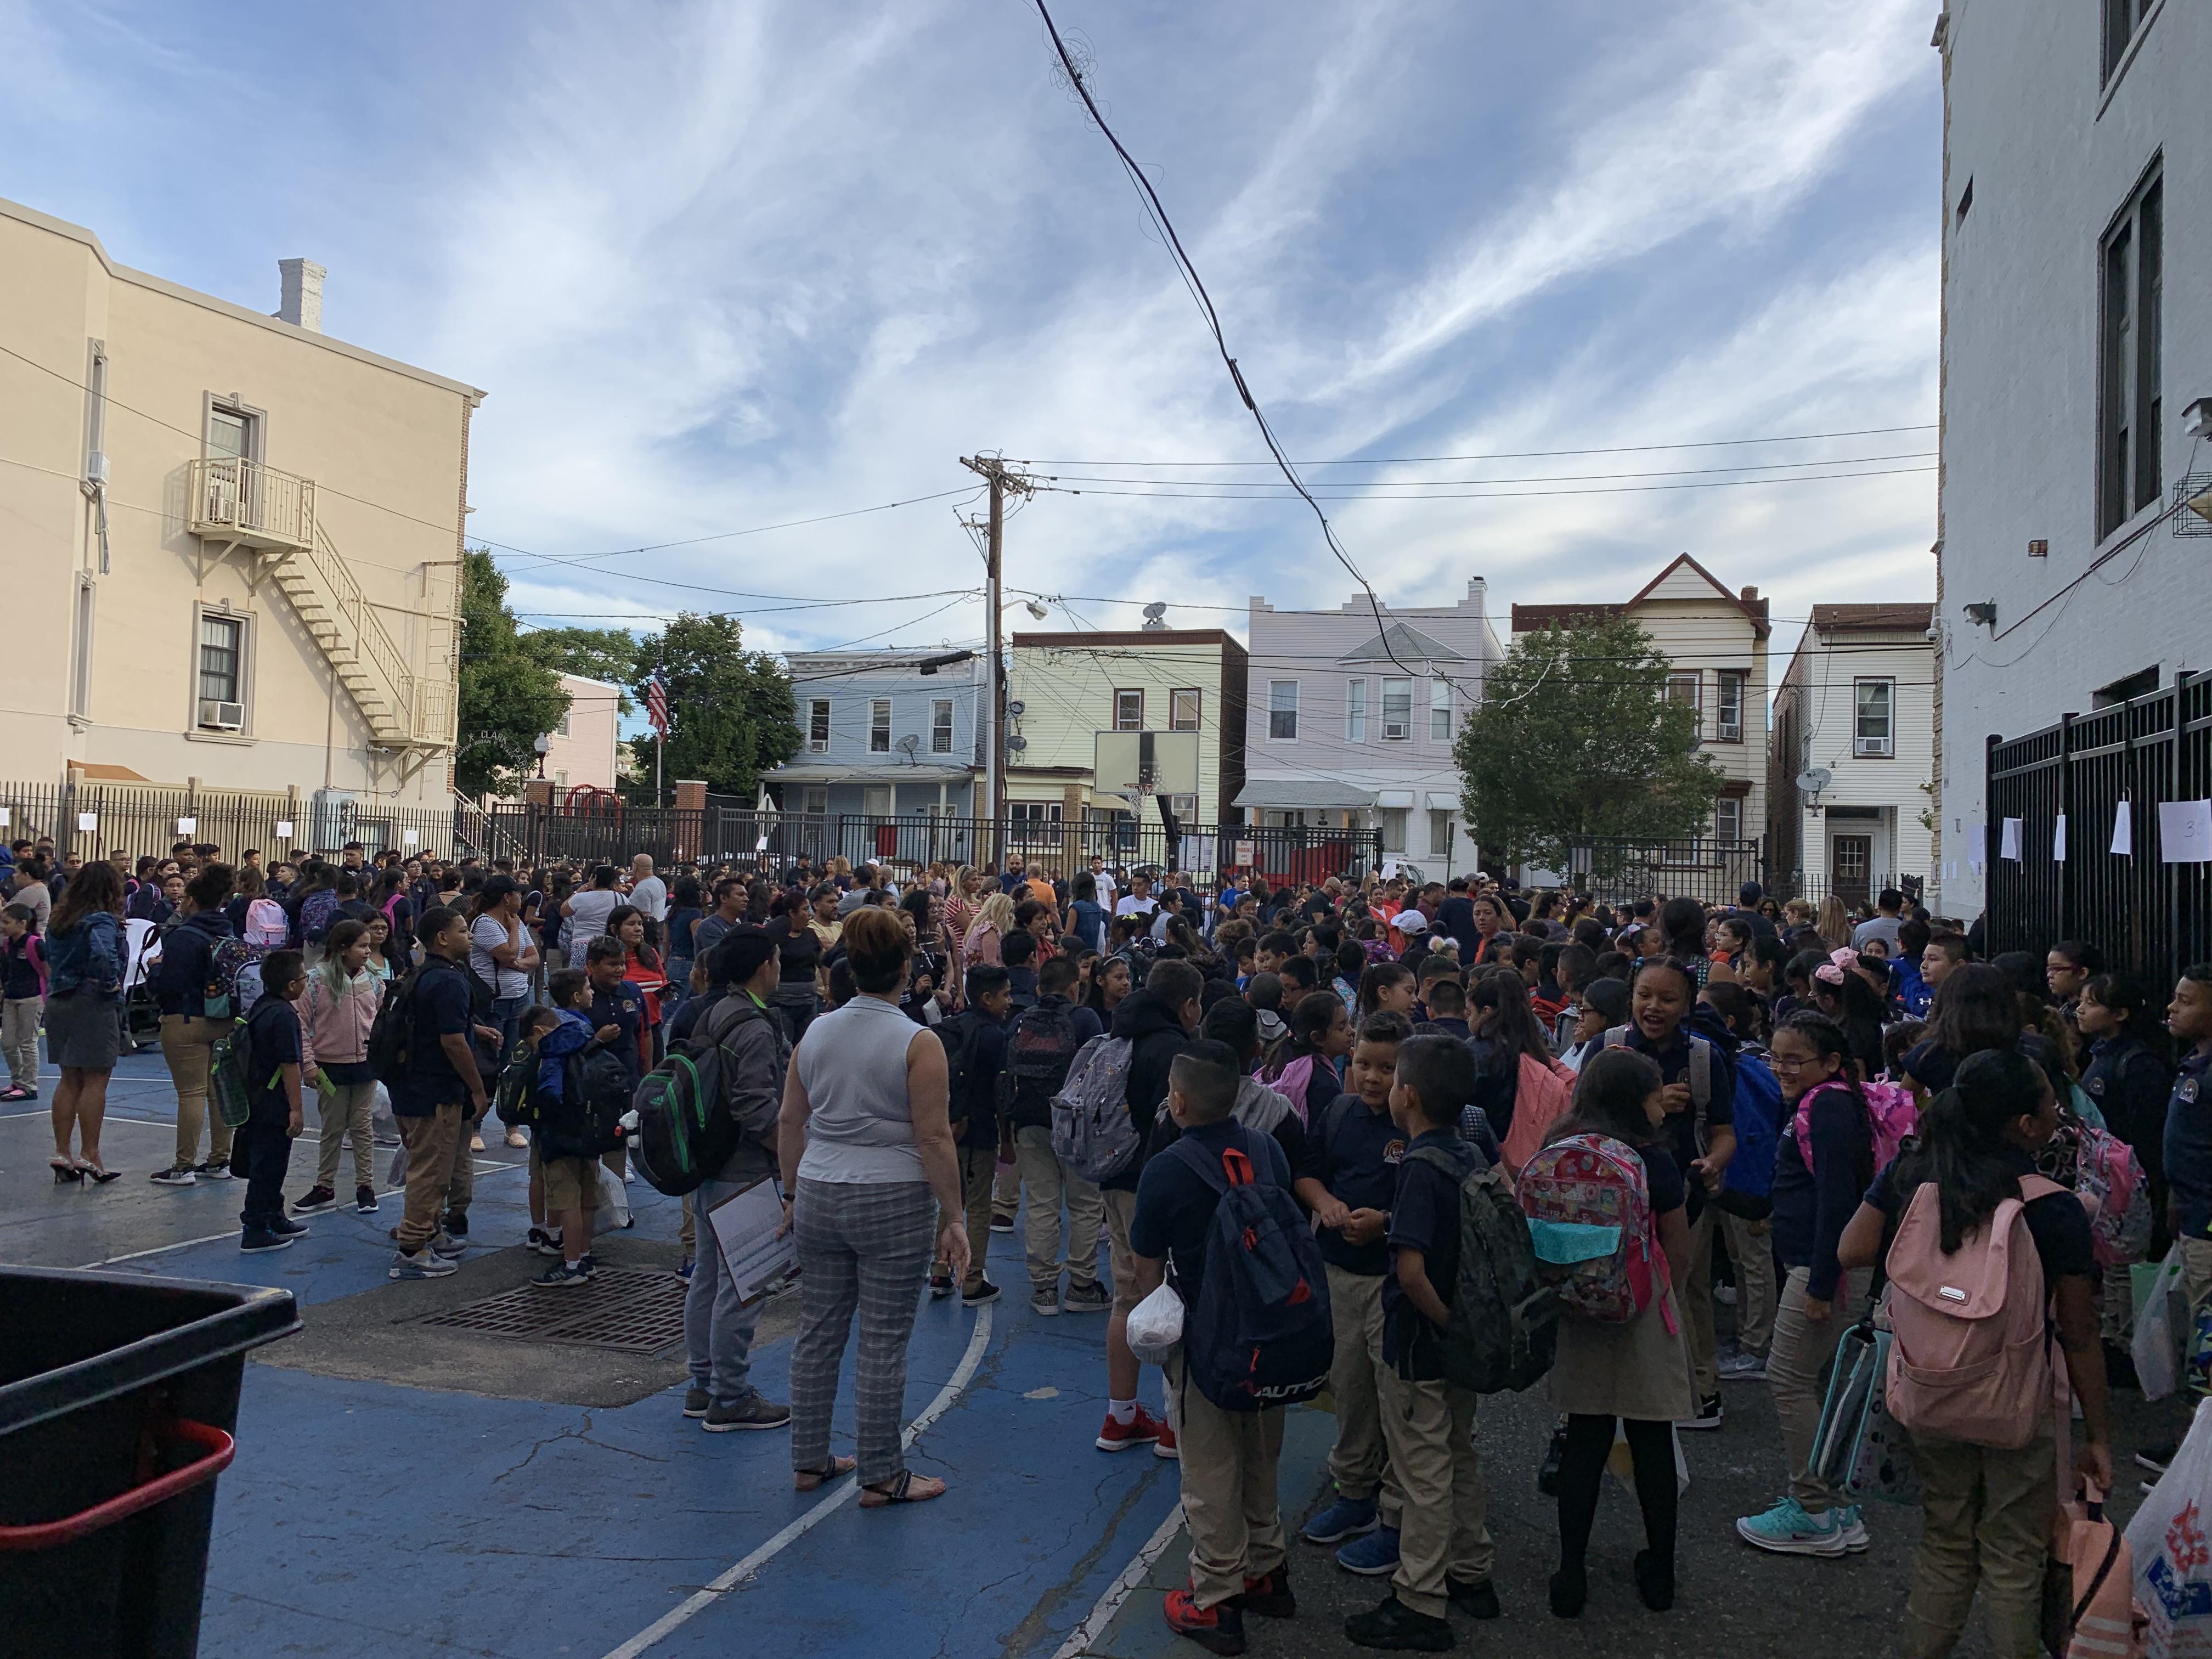 roosevelt students gathered in the yard for the new school year